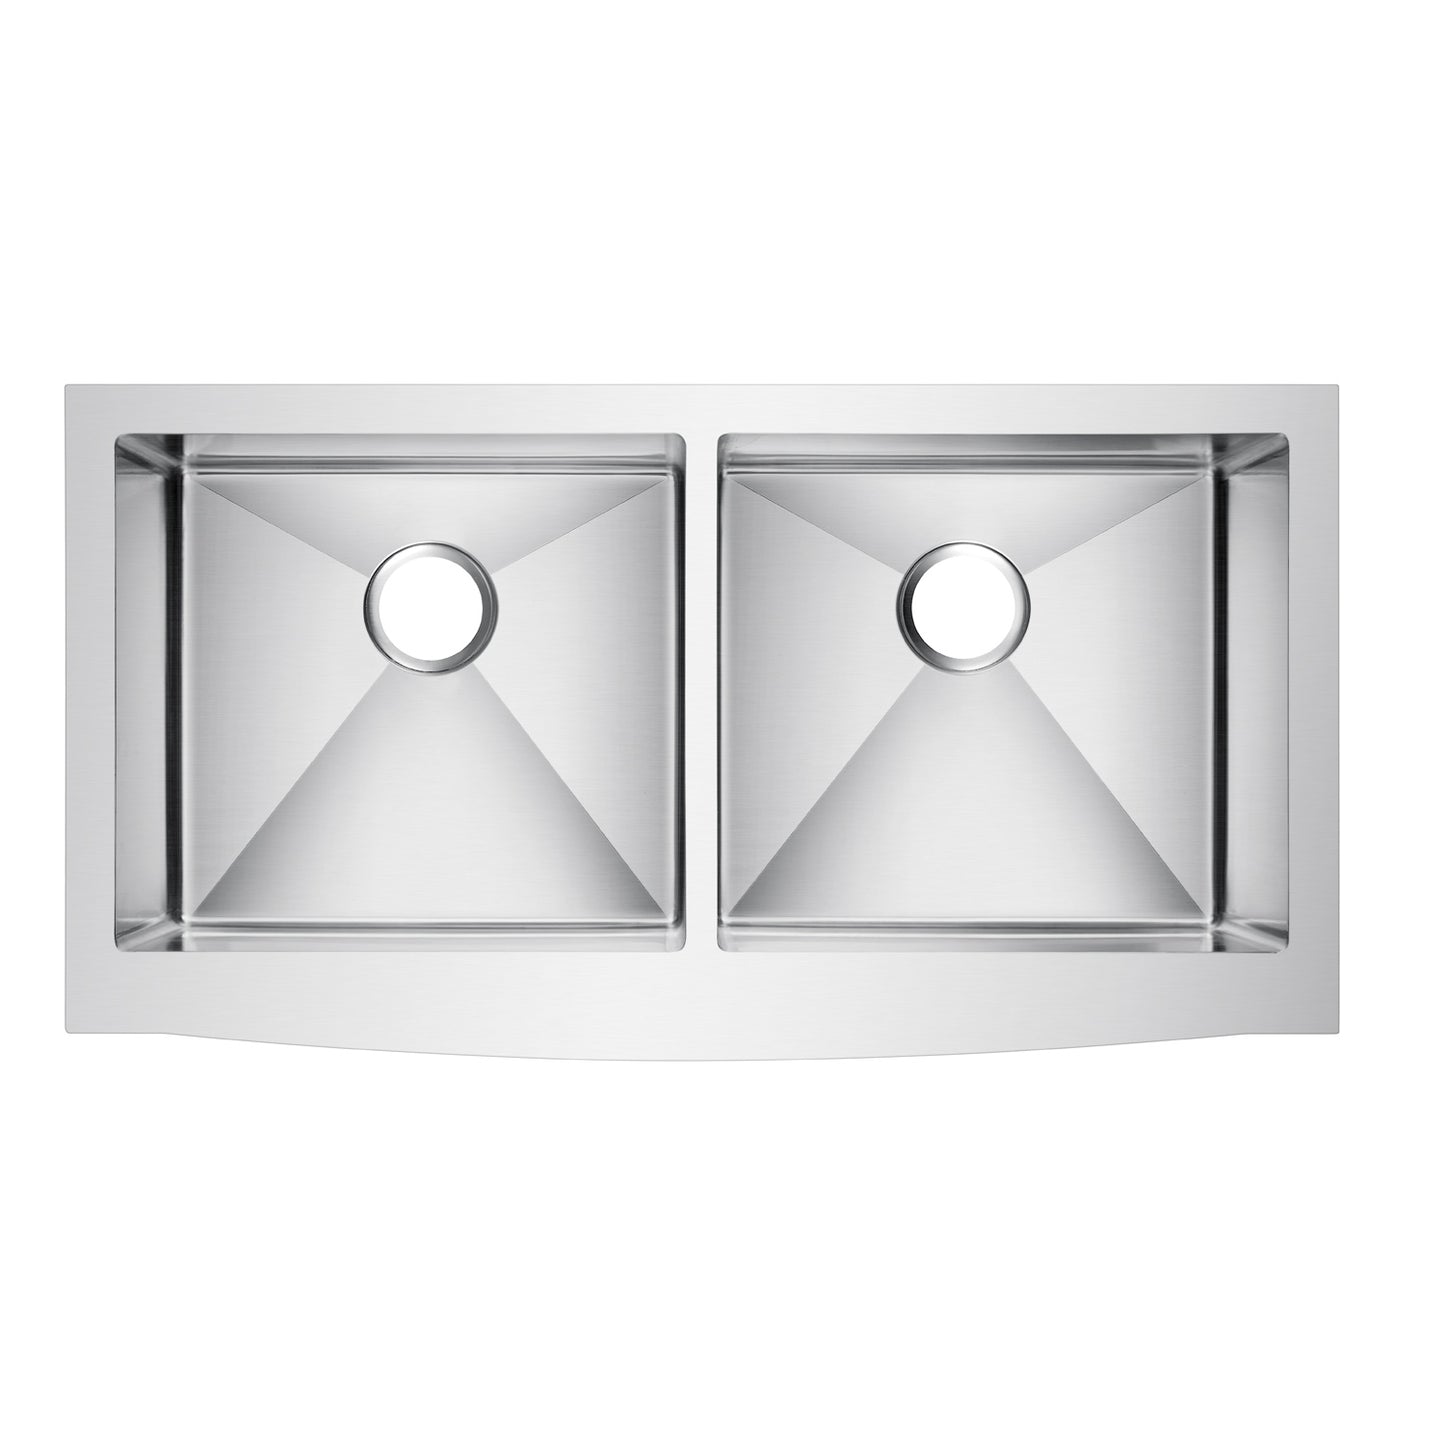 Dixon 39" Stainless Steel Double Bowl Curved Front Apron Sink